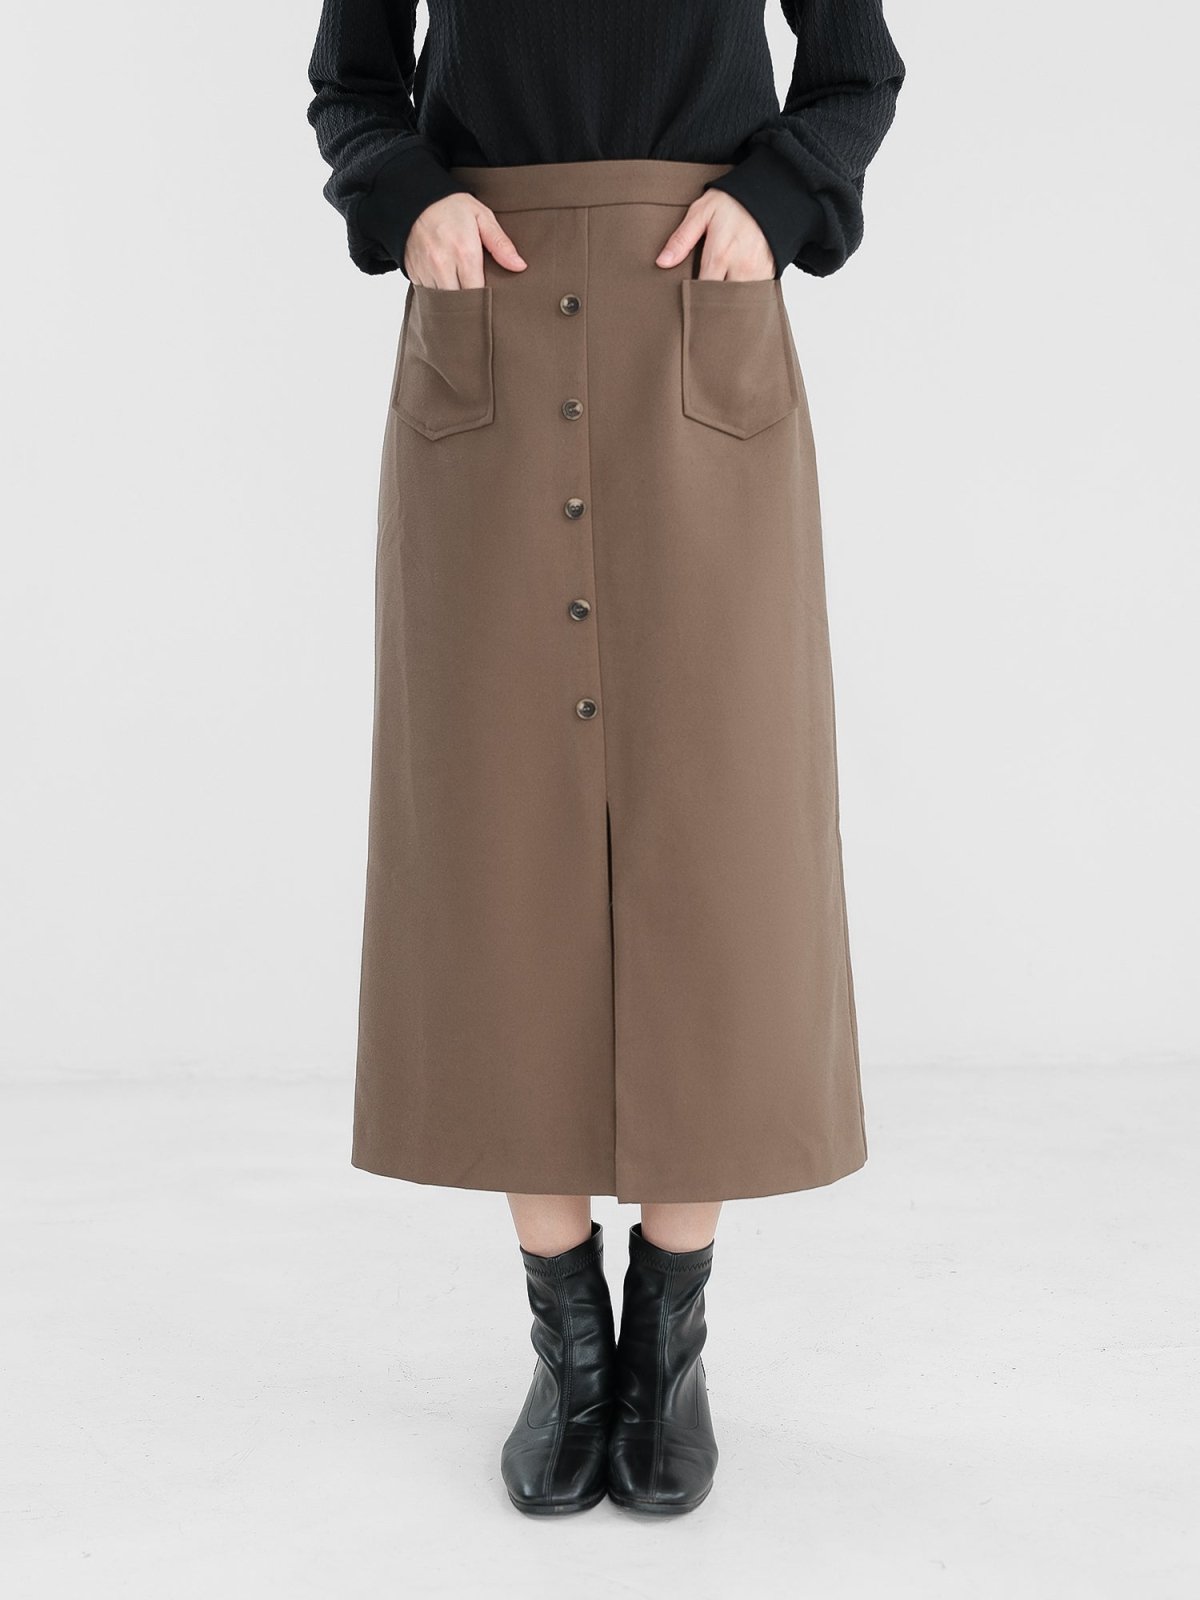 Valkyrie Buttoned Midi Skirt - DAG-DD1303-23BrownieS - Brownie - S - D'zage Designs